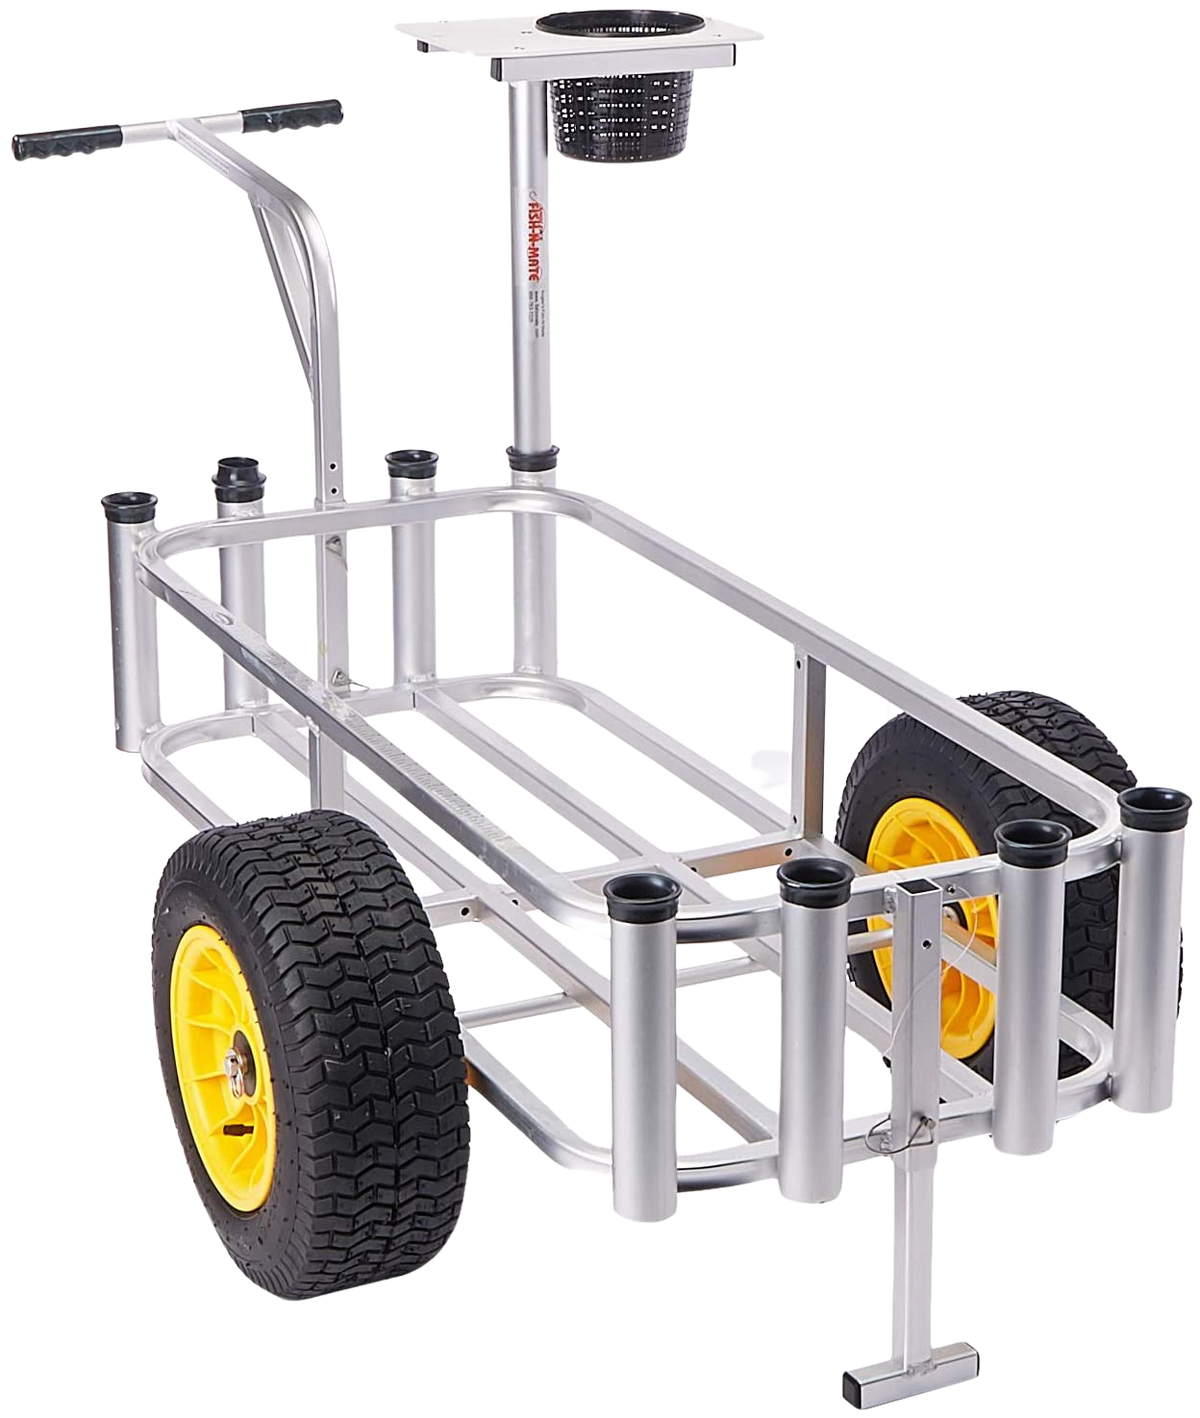 Angler's Fish-N-Mate 143 Pier Cart with Cutting Board and Bait Basket New